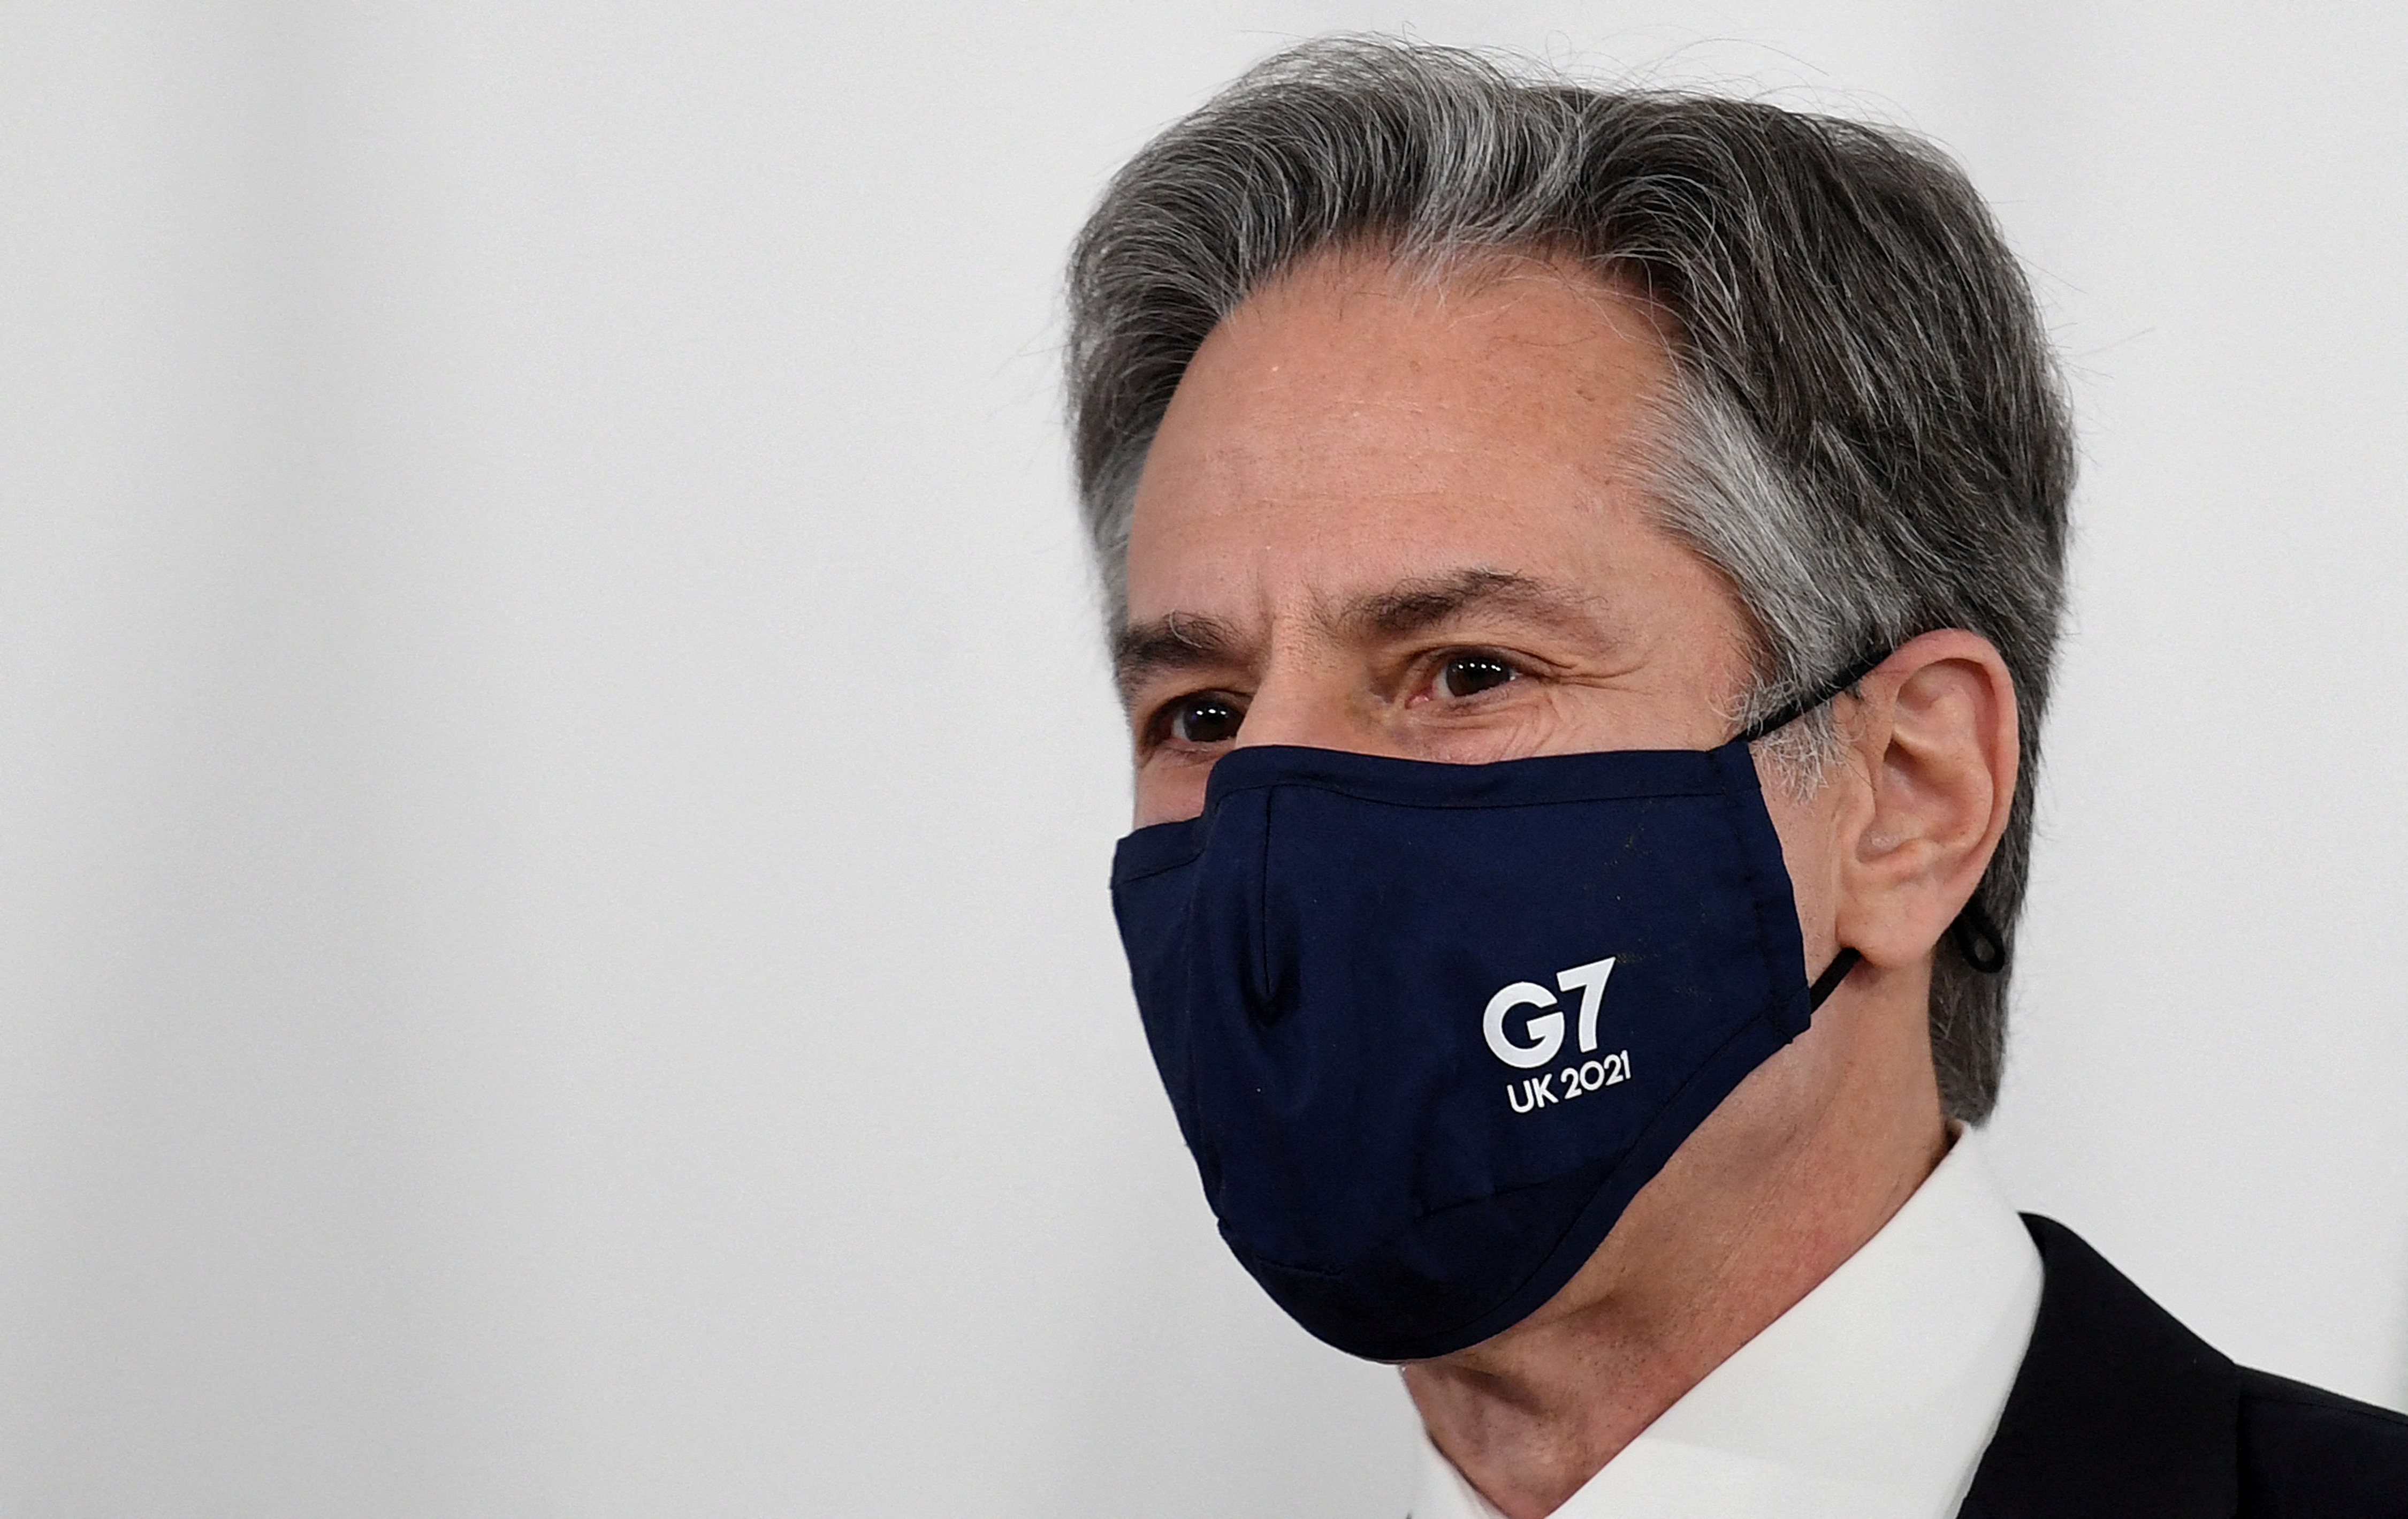 U.S. Secretary of State Antony Blinken, wearing a face covering to combat the coronavirus spread, attends a G7 foreign and development ministers session with guest countries and ASEAN nations on the final day of the summit in Liverpool, Britain December 12, 2021. Olivier Douliery/Pool via REUTERS